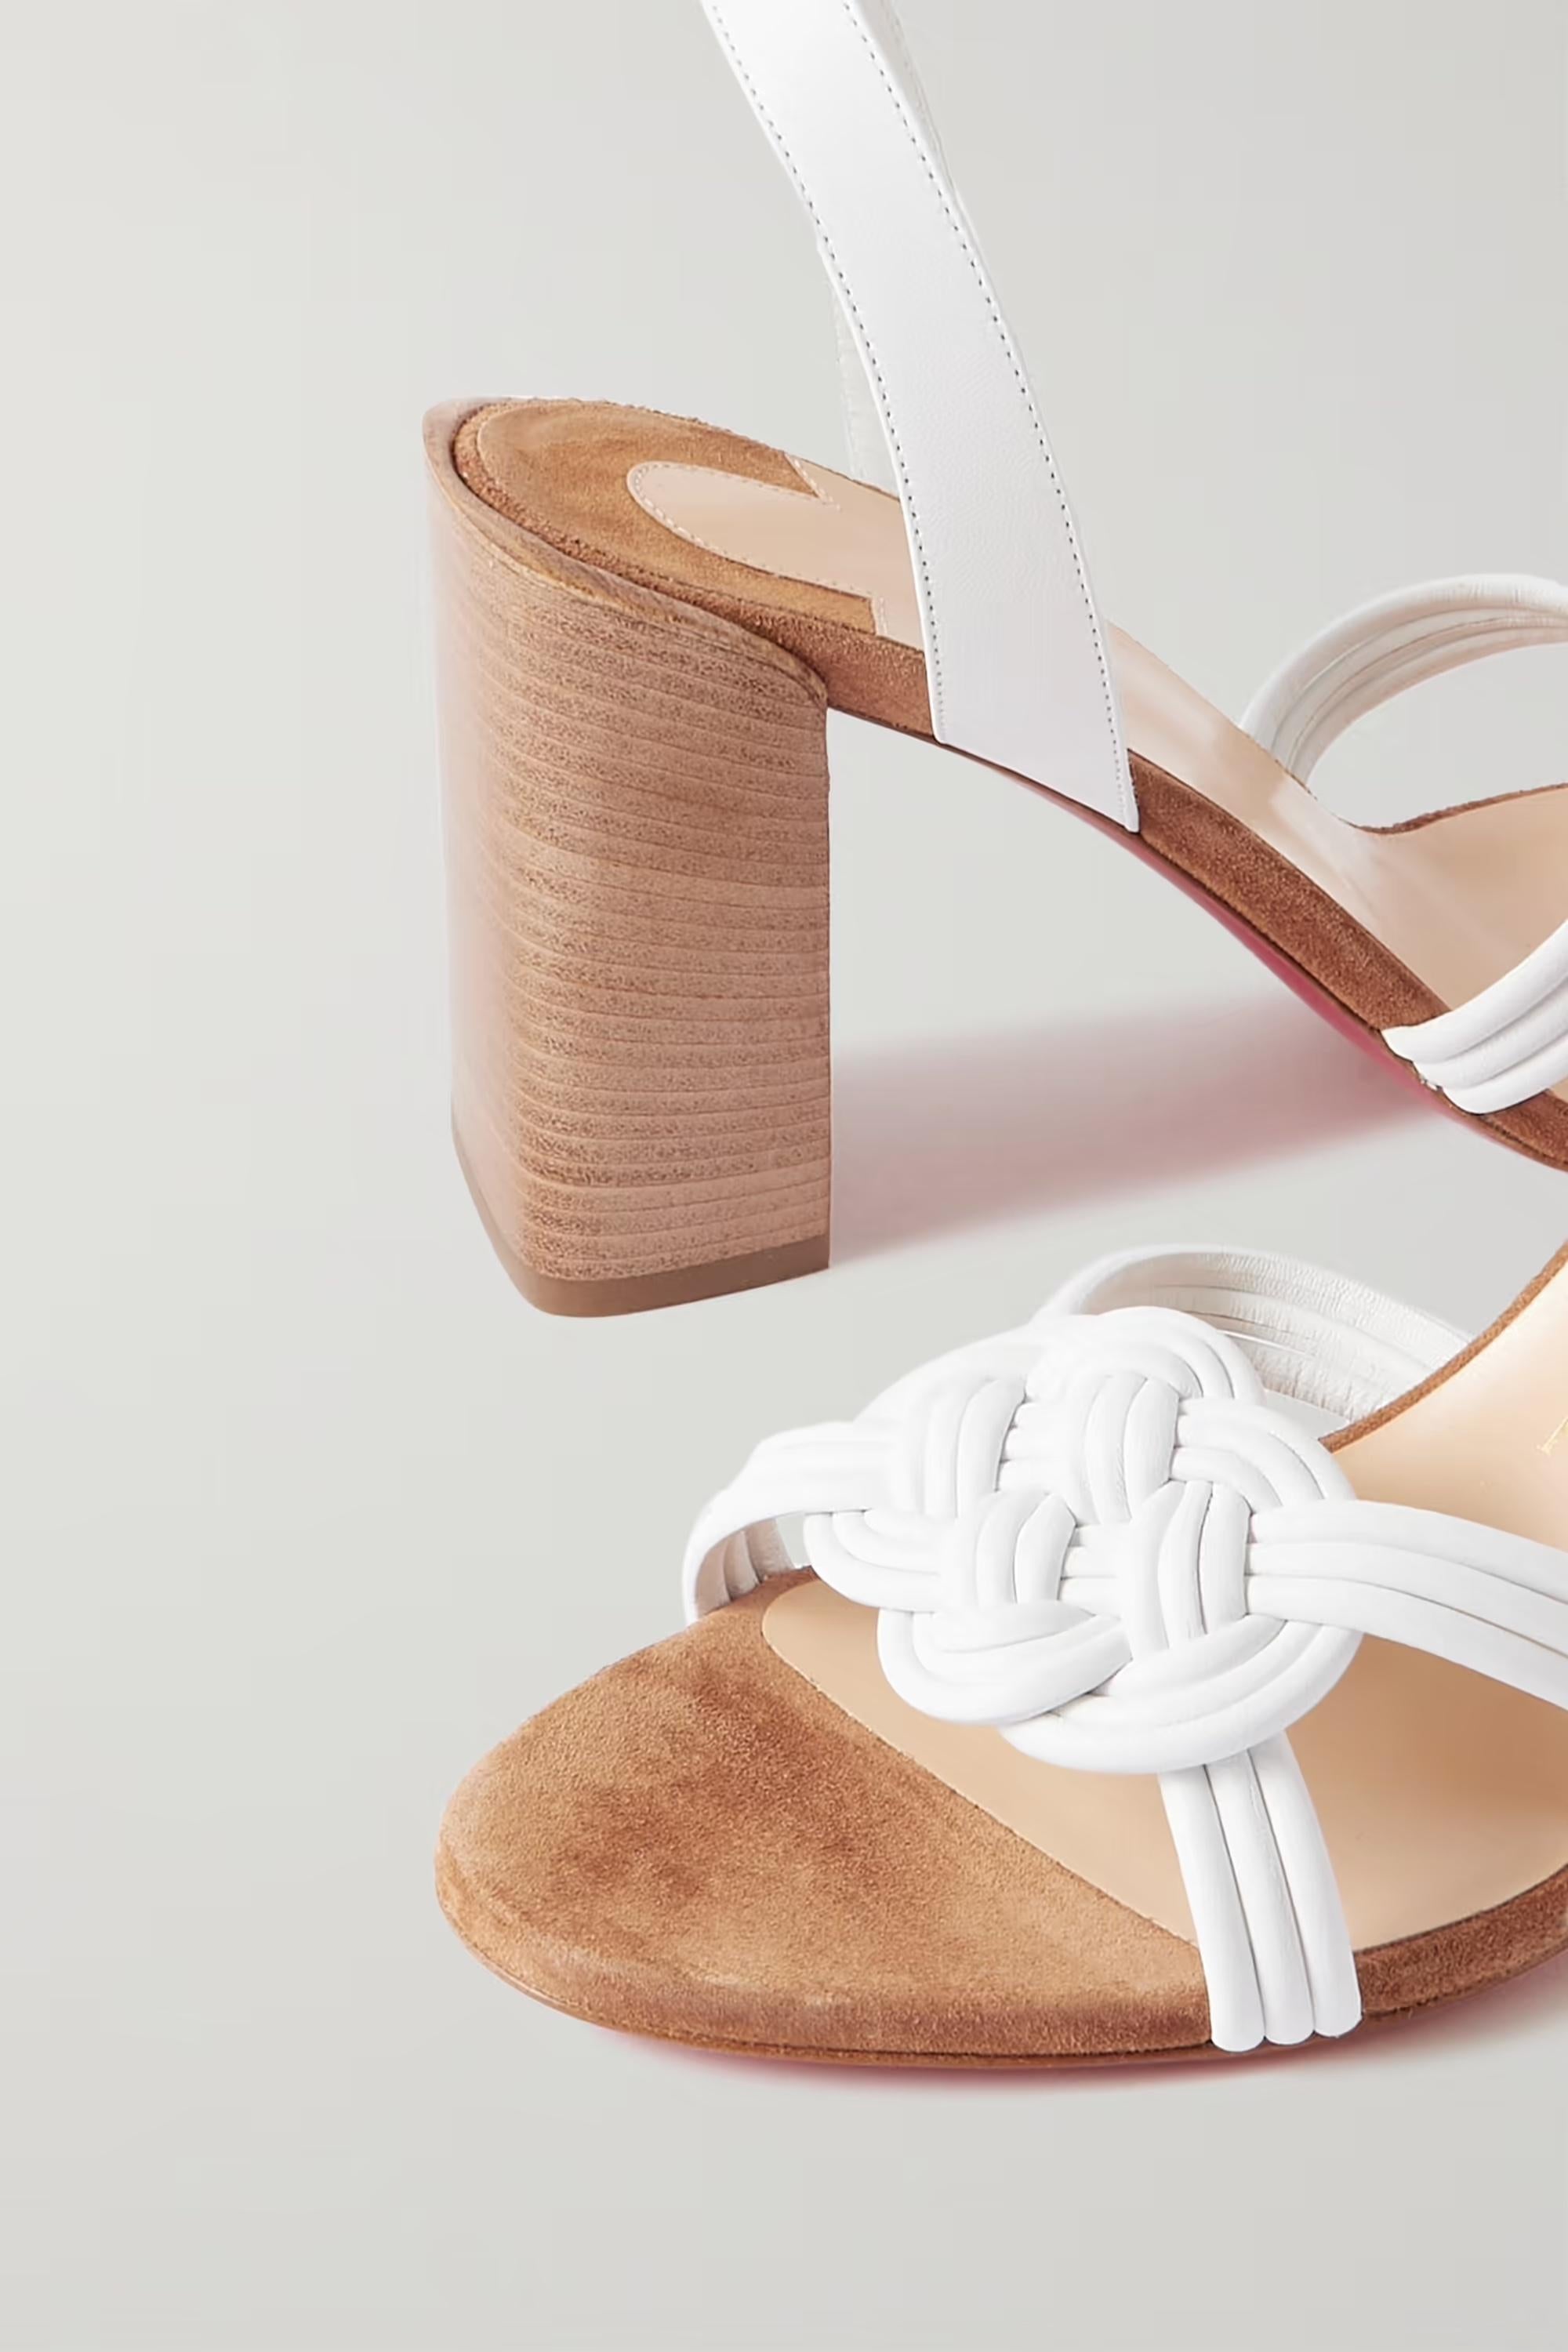 Christian Louboutin's 'Ella' sandals have been made in Italy from supple white leather that's artfully interwoven at the toes. They're set on sturdy block heels and have supportive buckle-fastening ankle straps. Brand new, never worn. Comes in